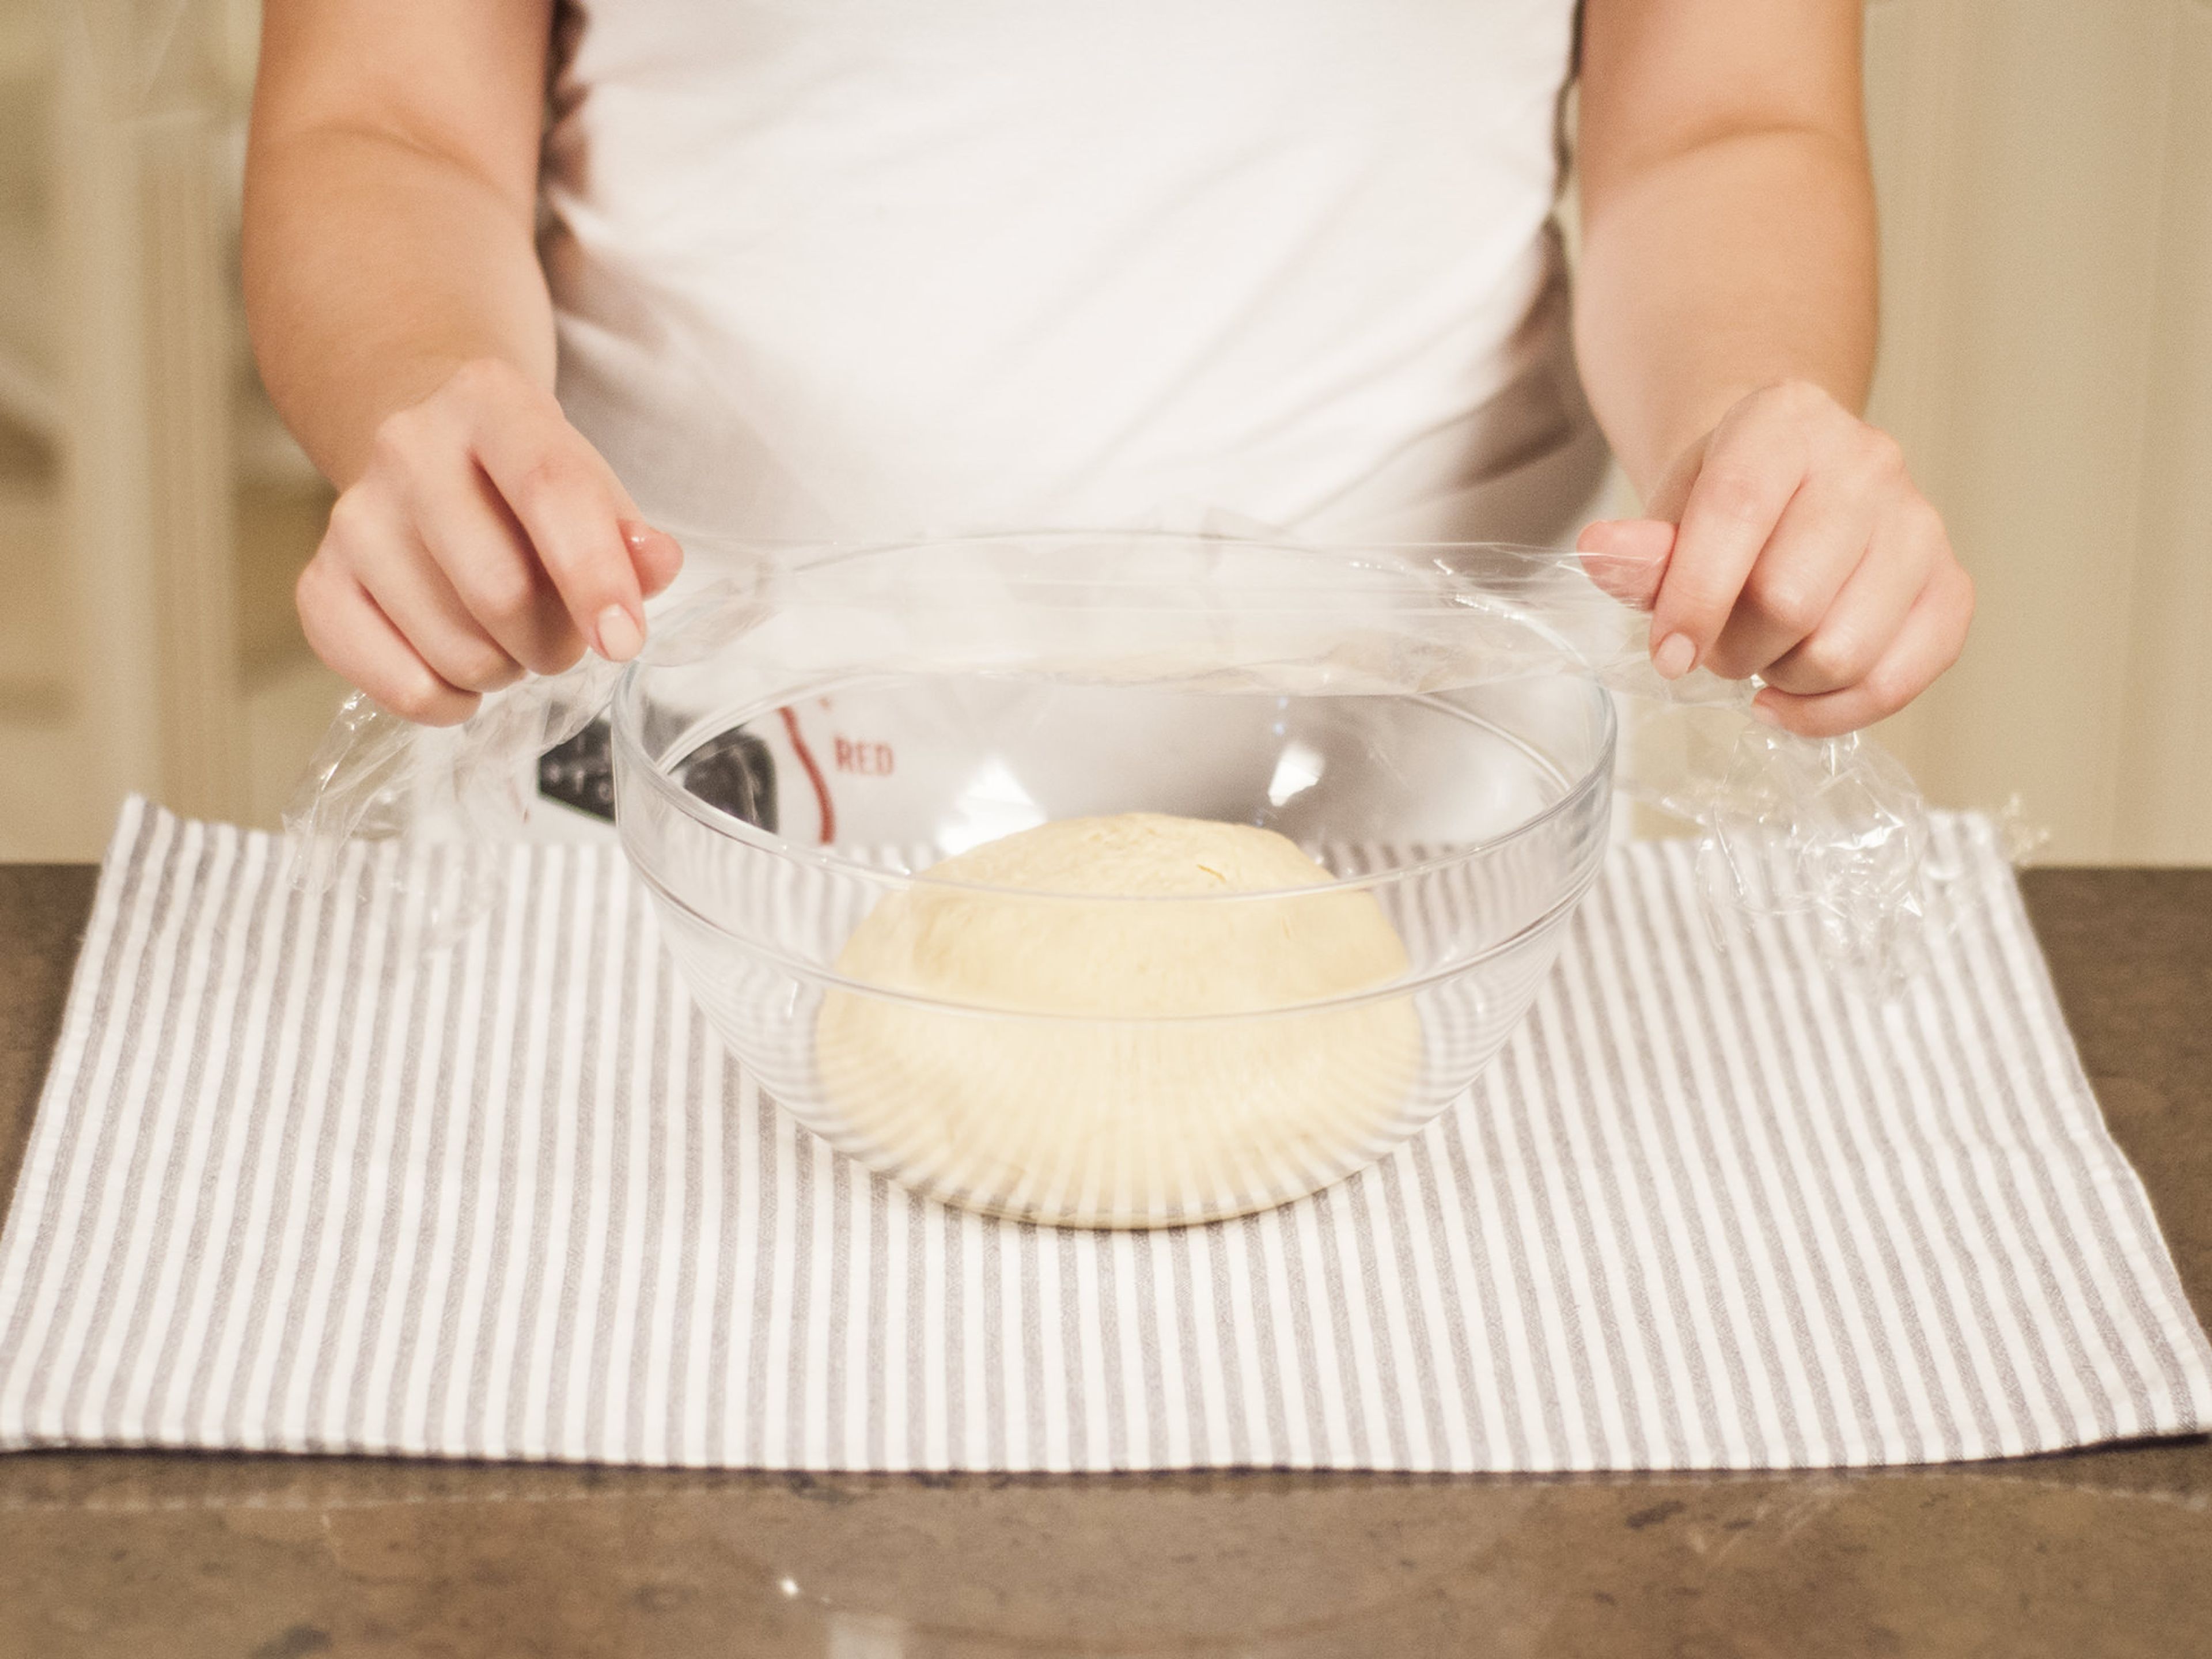 Cover the dough and leave to cool for approx. 30 min.